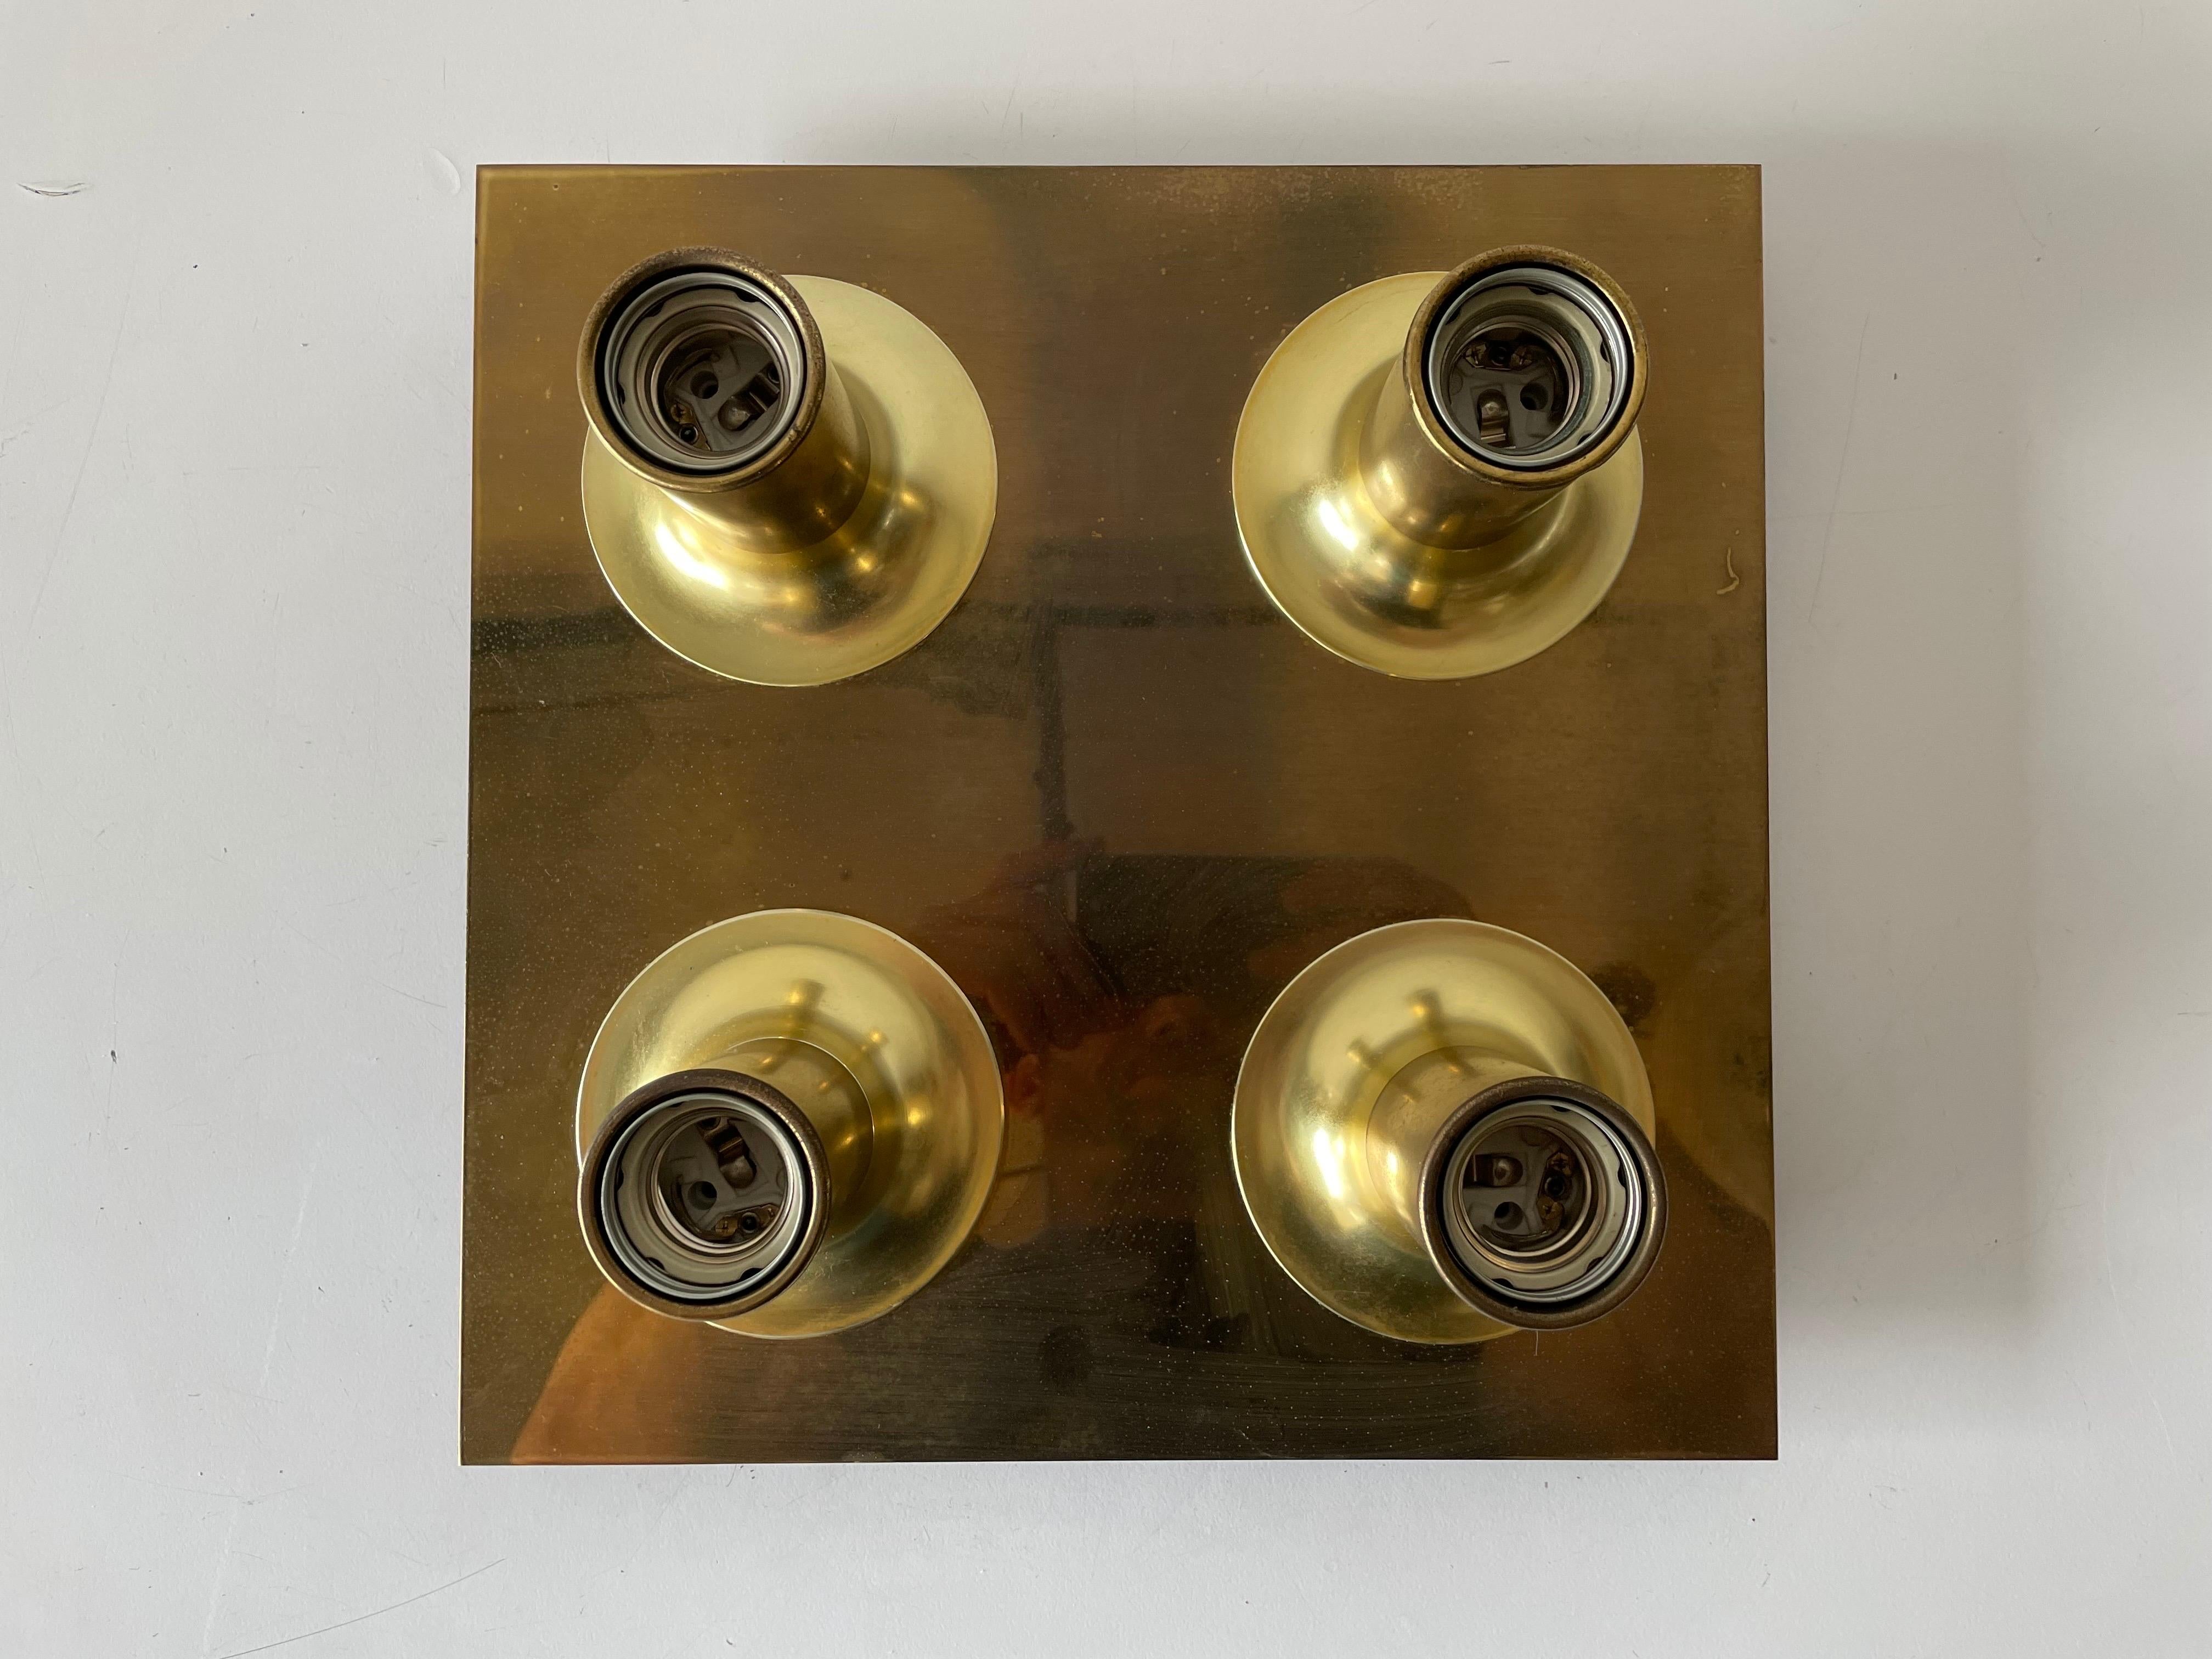 Metal Brass Square Design 4 Head Ceiling Lamp by Cosack, 1970s, Germany For Sale